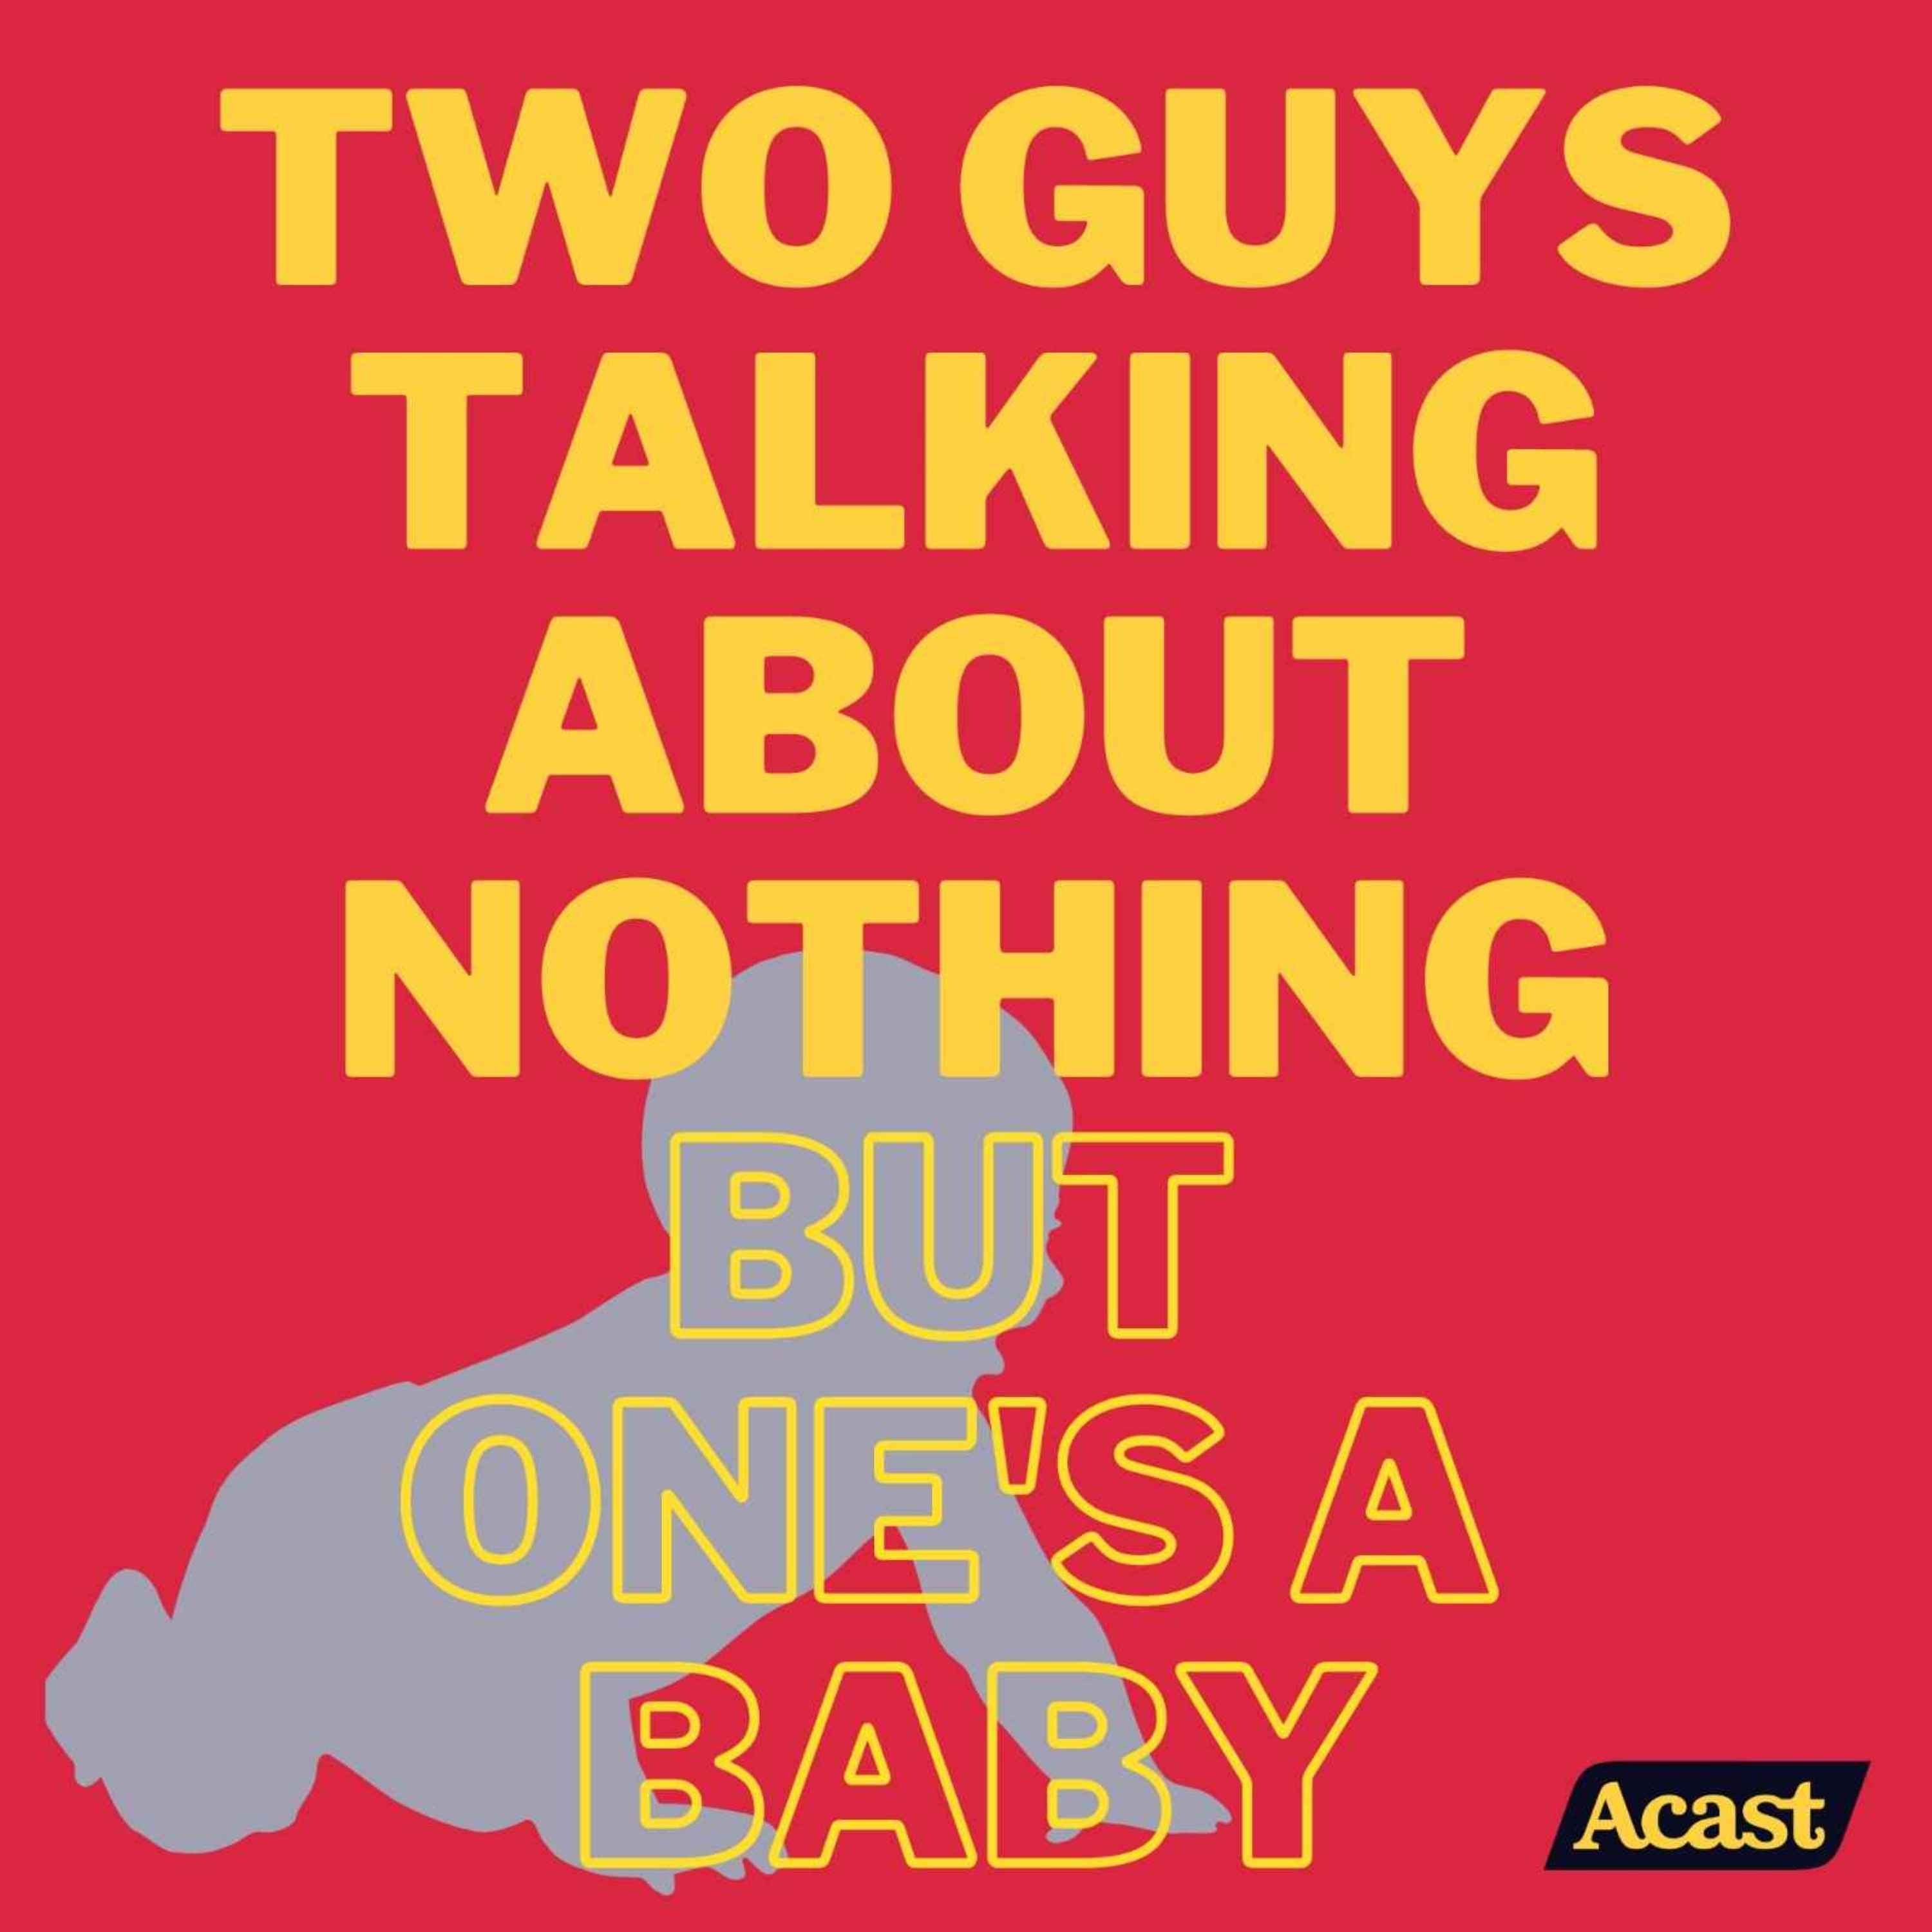 Introducing: Two Guys Talking About Nothing But One's A Baby